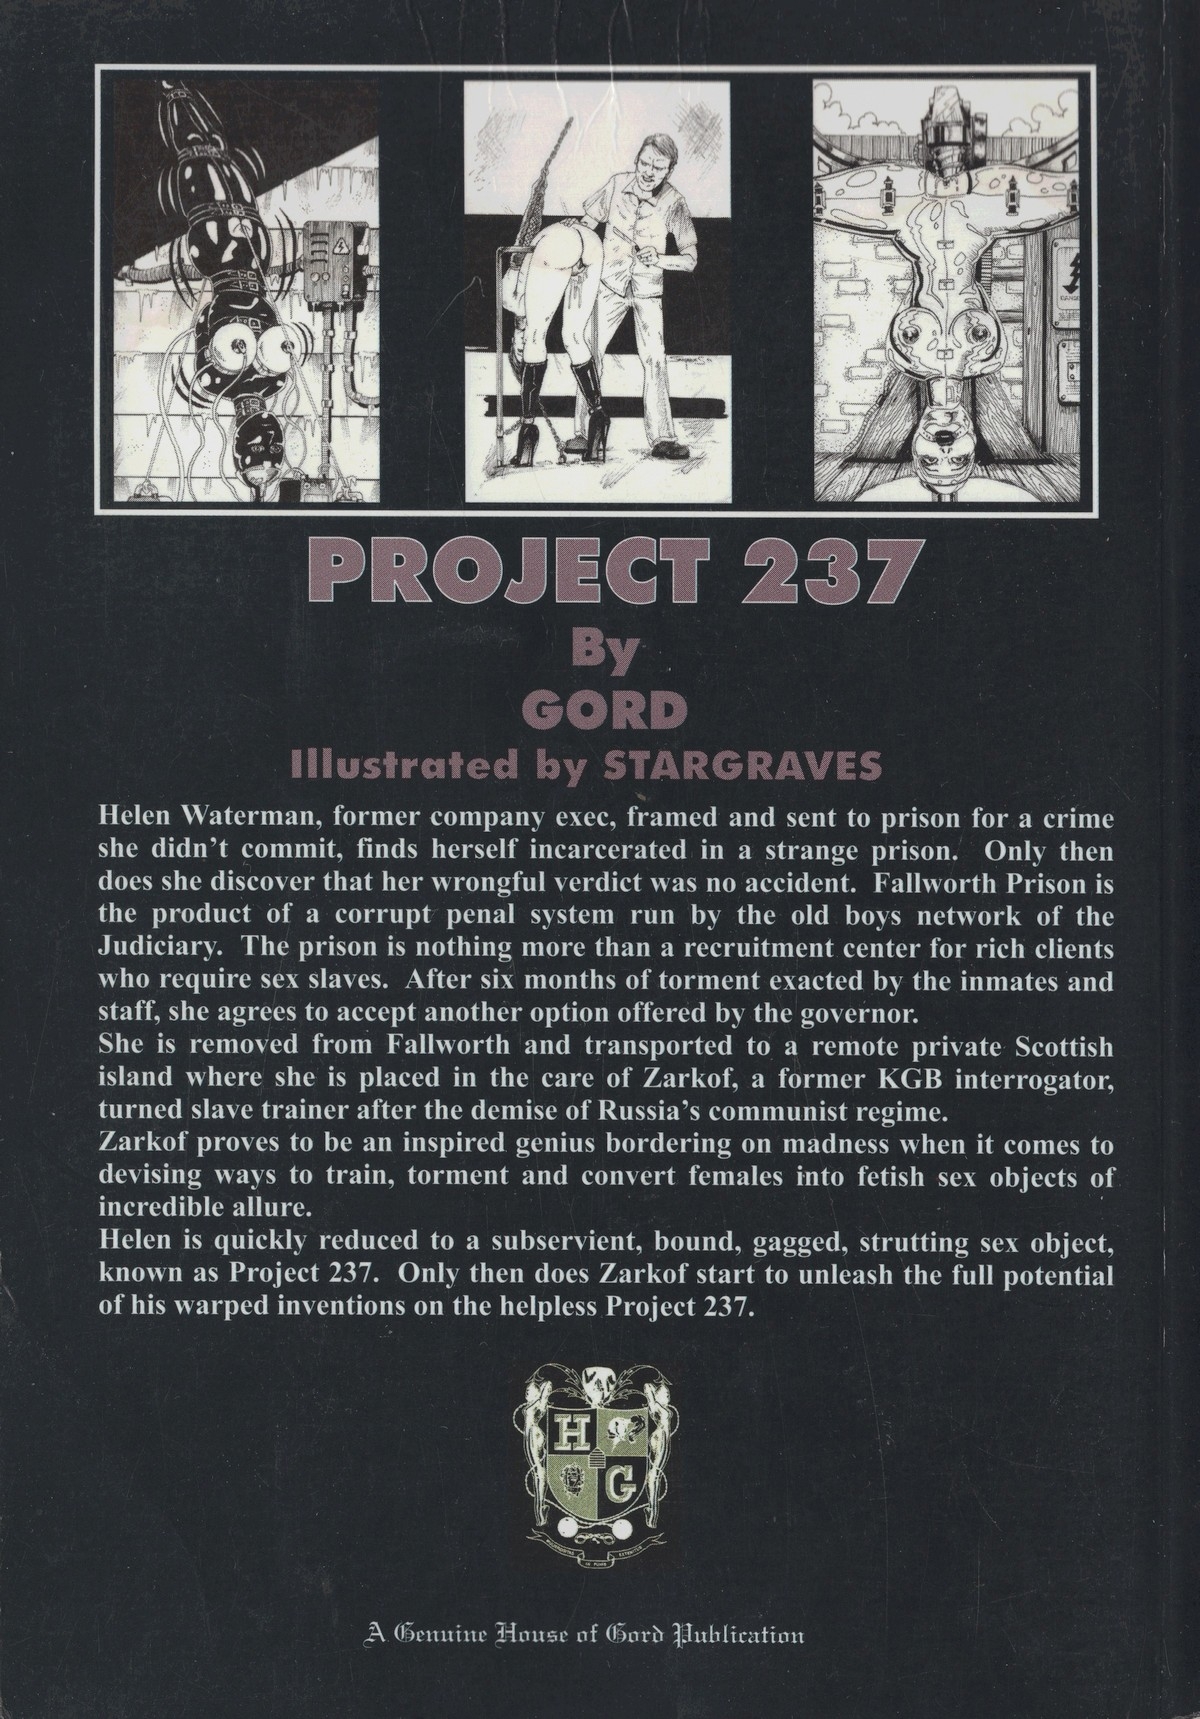 House of Gord BD-027 - Project 237 (with text) [English] 198